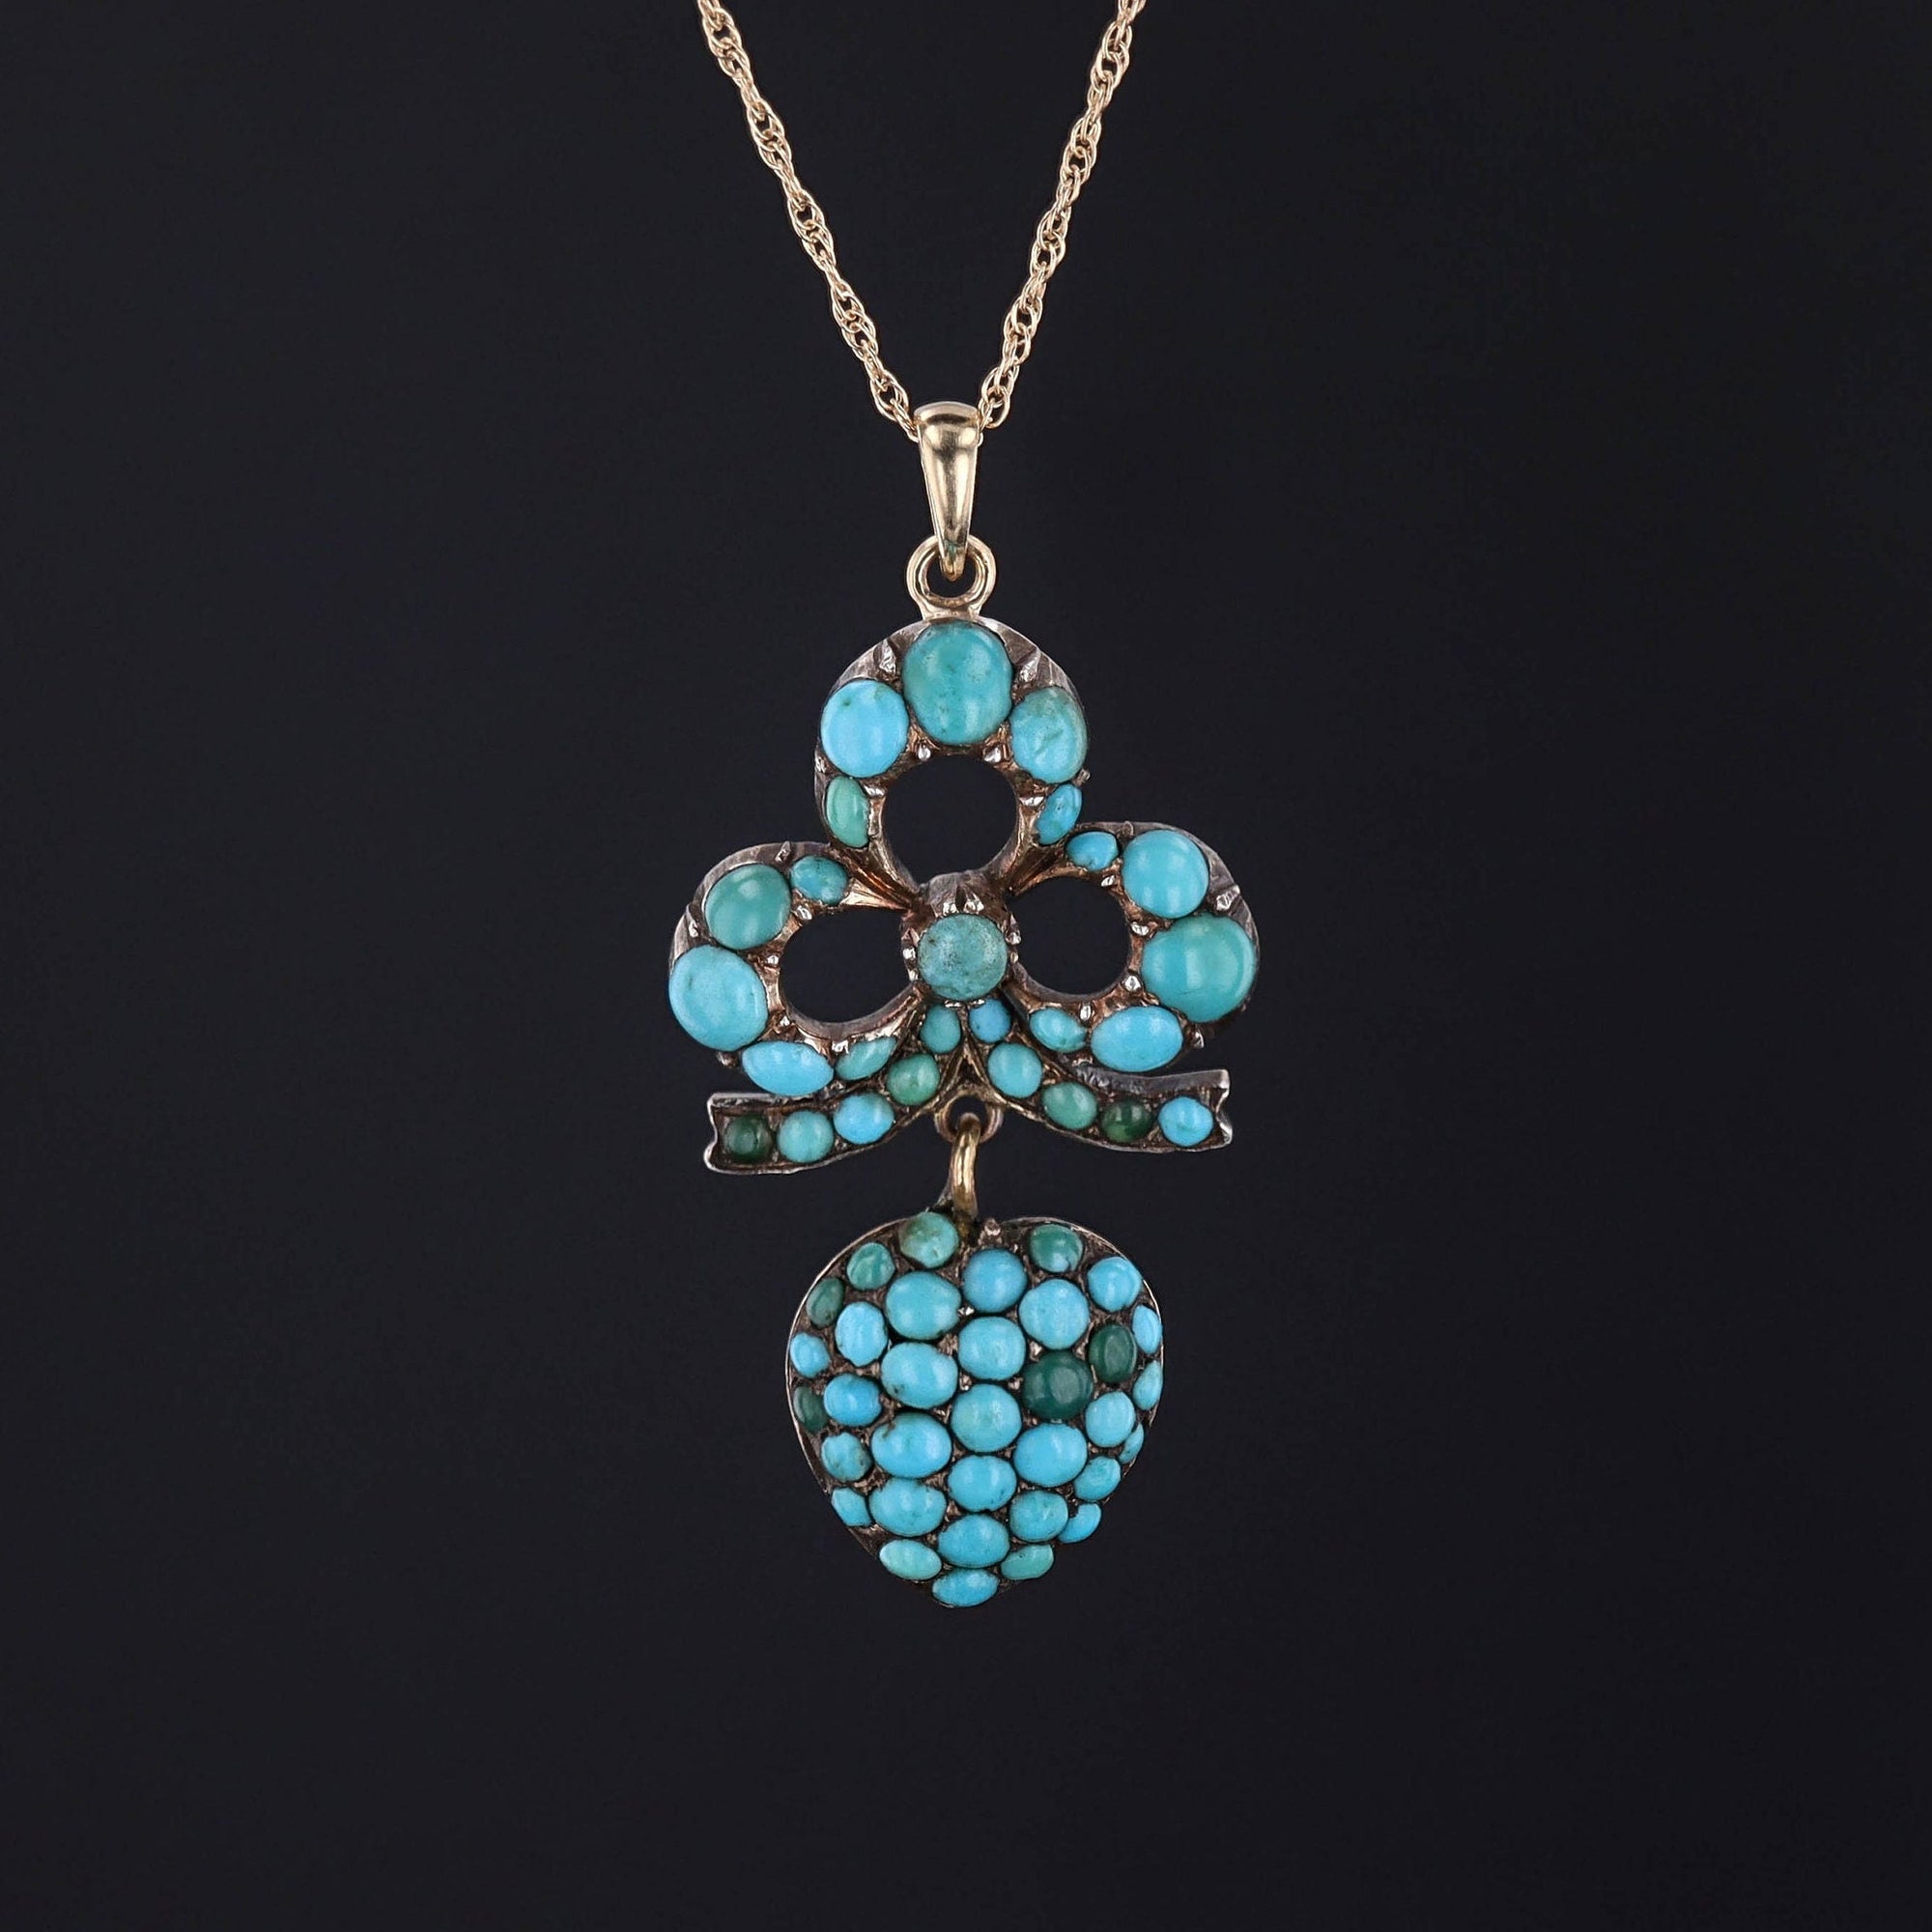 Antique Turquoise Heart Pendant | Silver & Turquoise Pendant with Optional 14k Gold Chain 